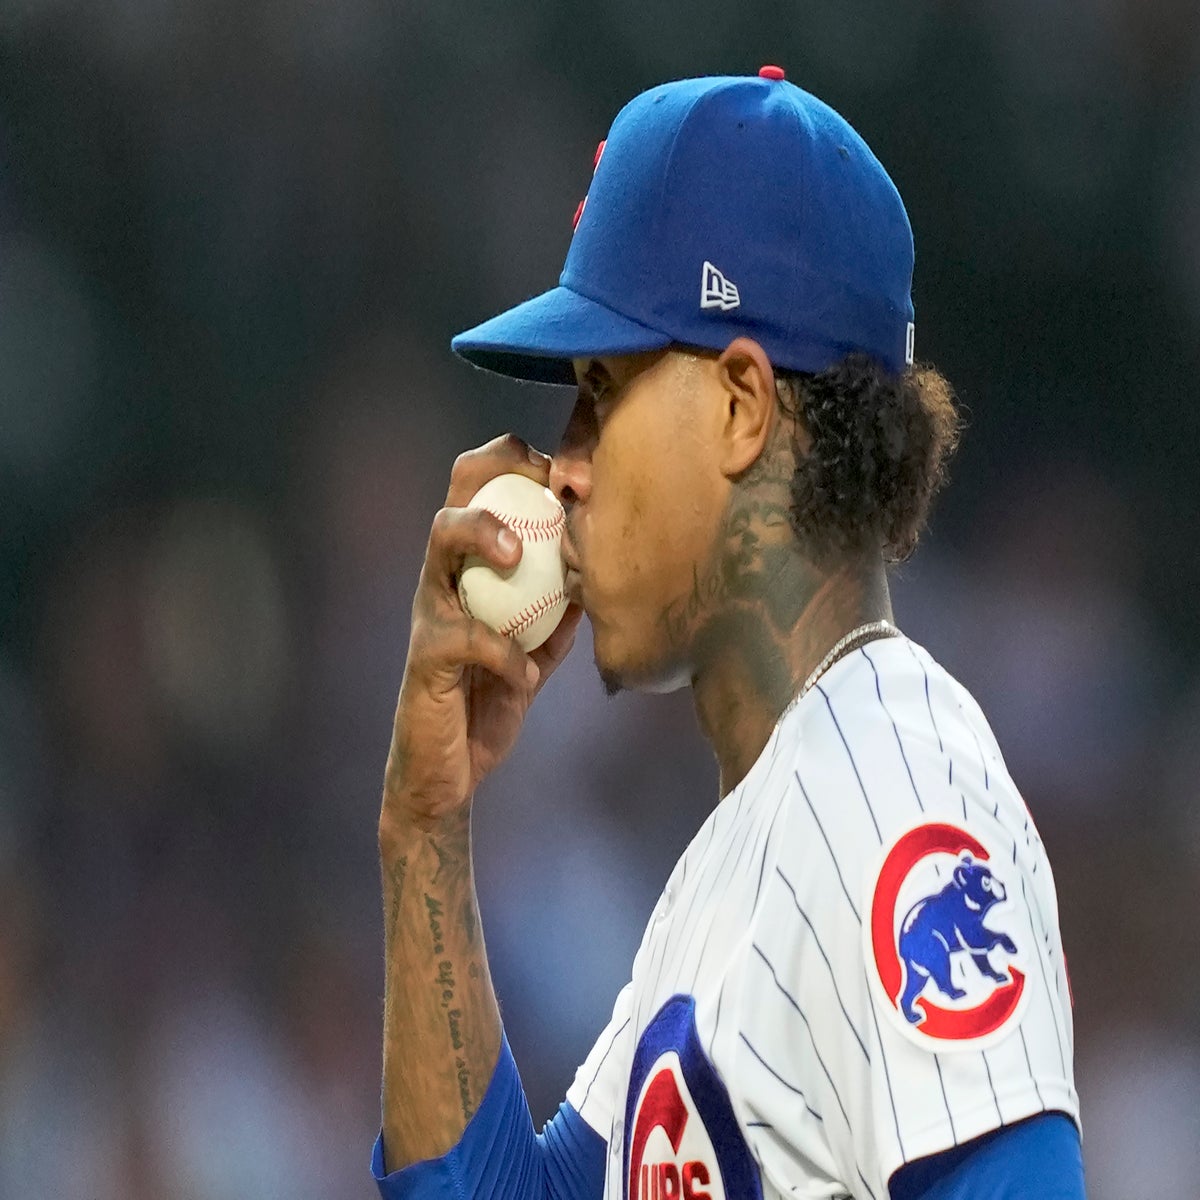 Cubs All-Star could help fans forget all about Marcus Stroman